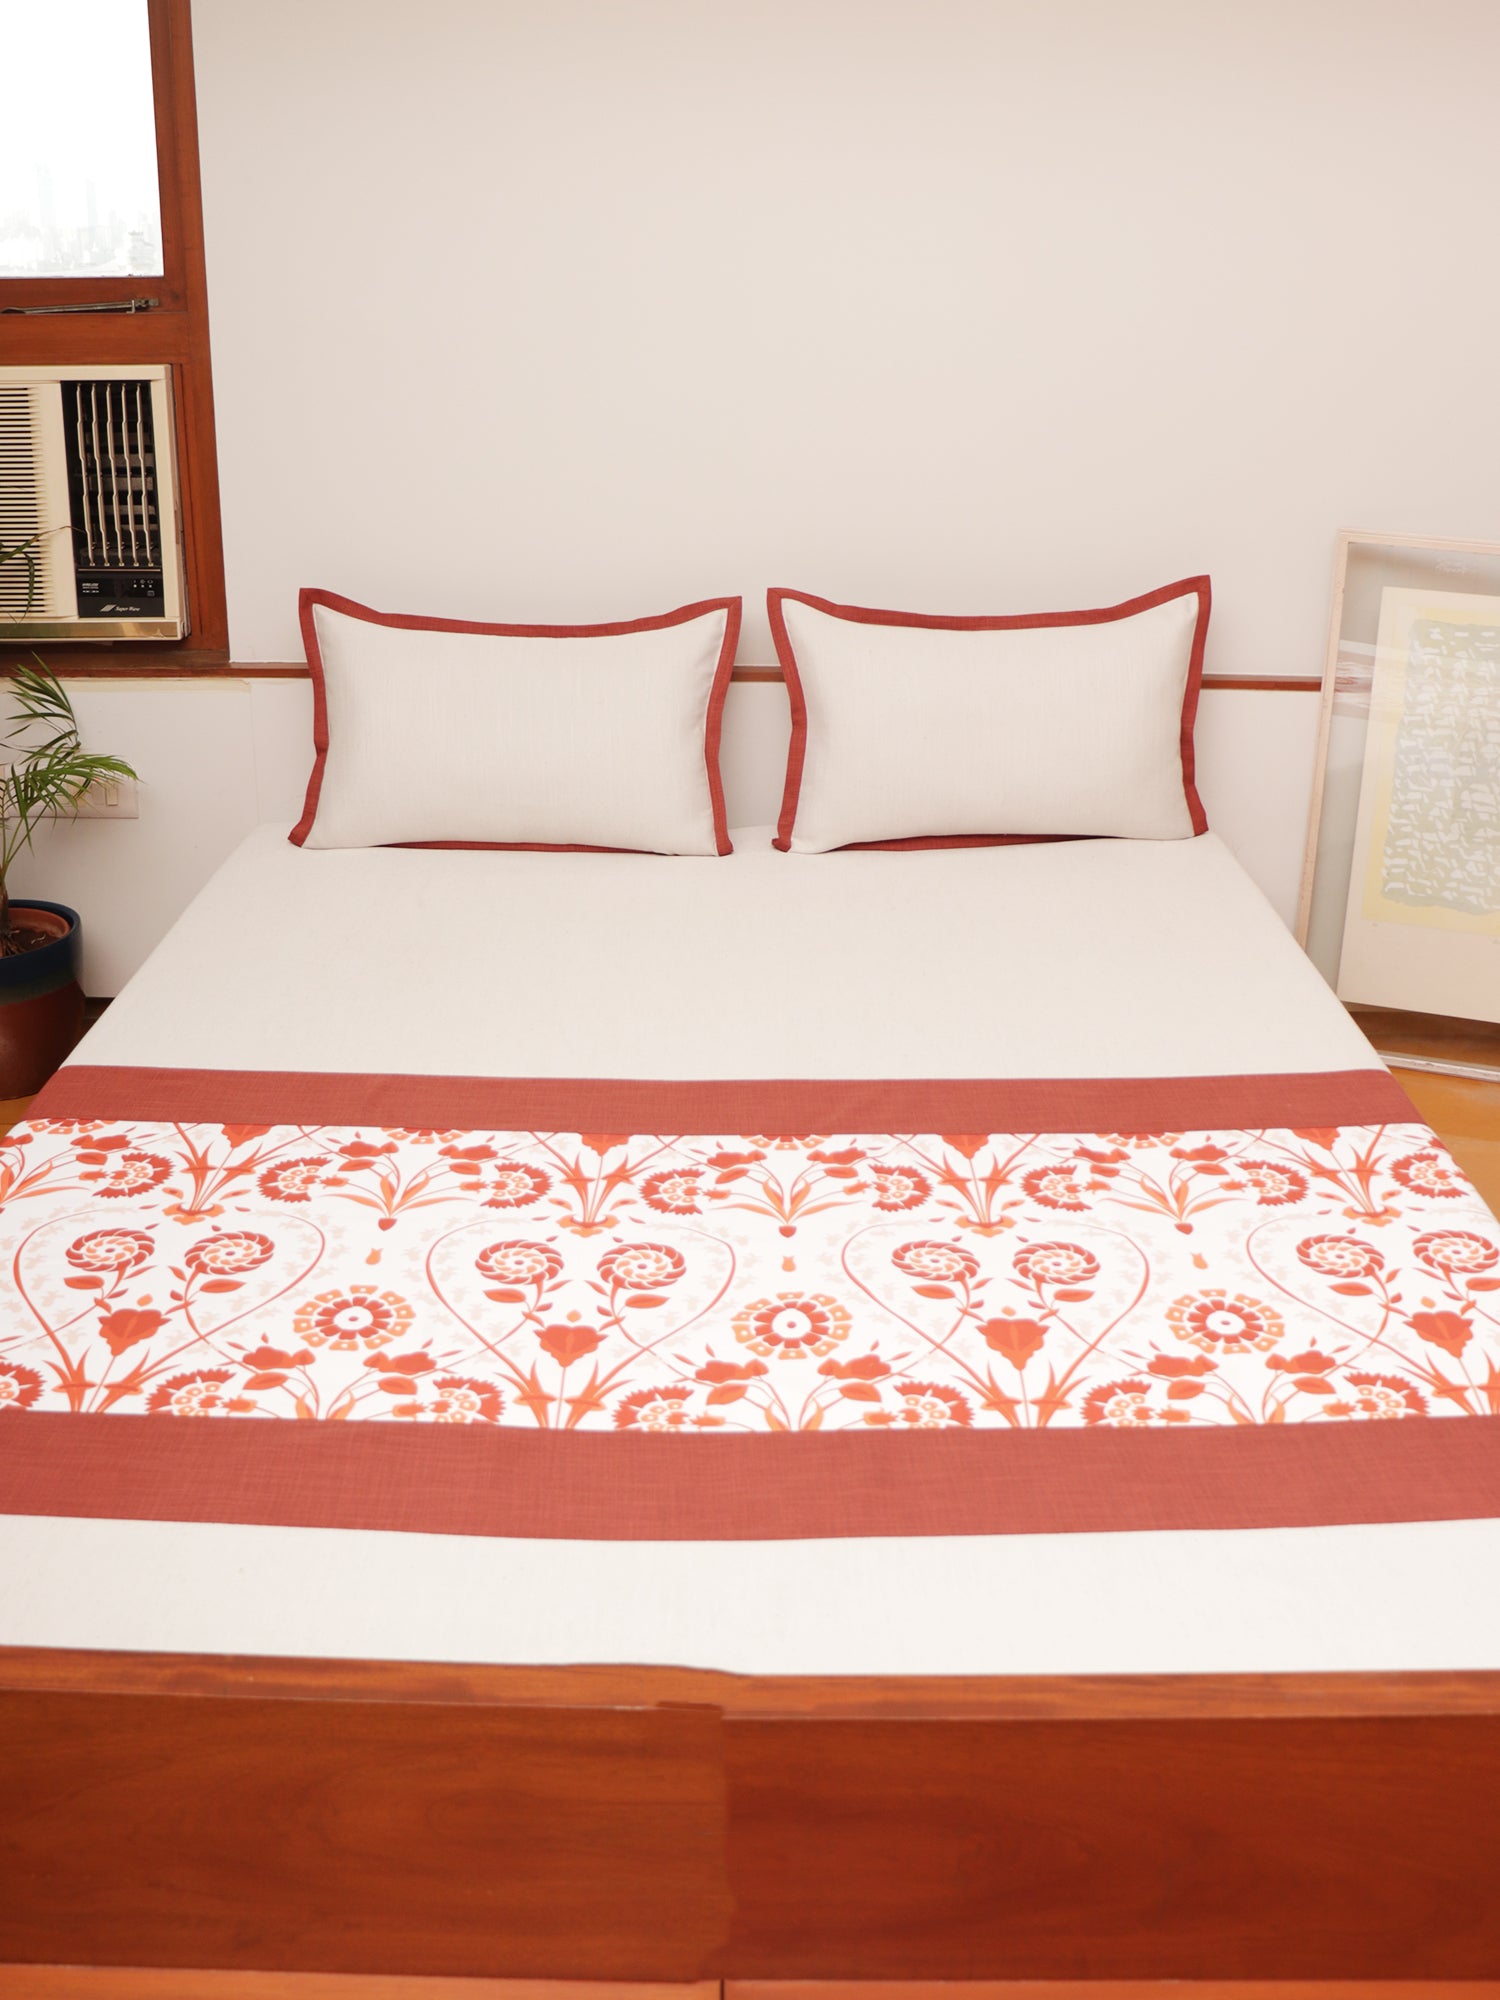 Printed Bedcover for Double Bed with 2 Pillow Covers | Queen Size - Rust Color | Bedcover 90 x 108inches (7.5x9ft), Pillow Covers 17x27in